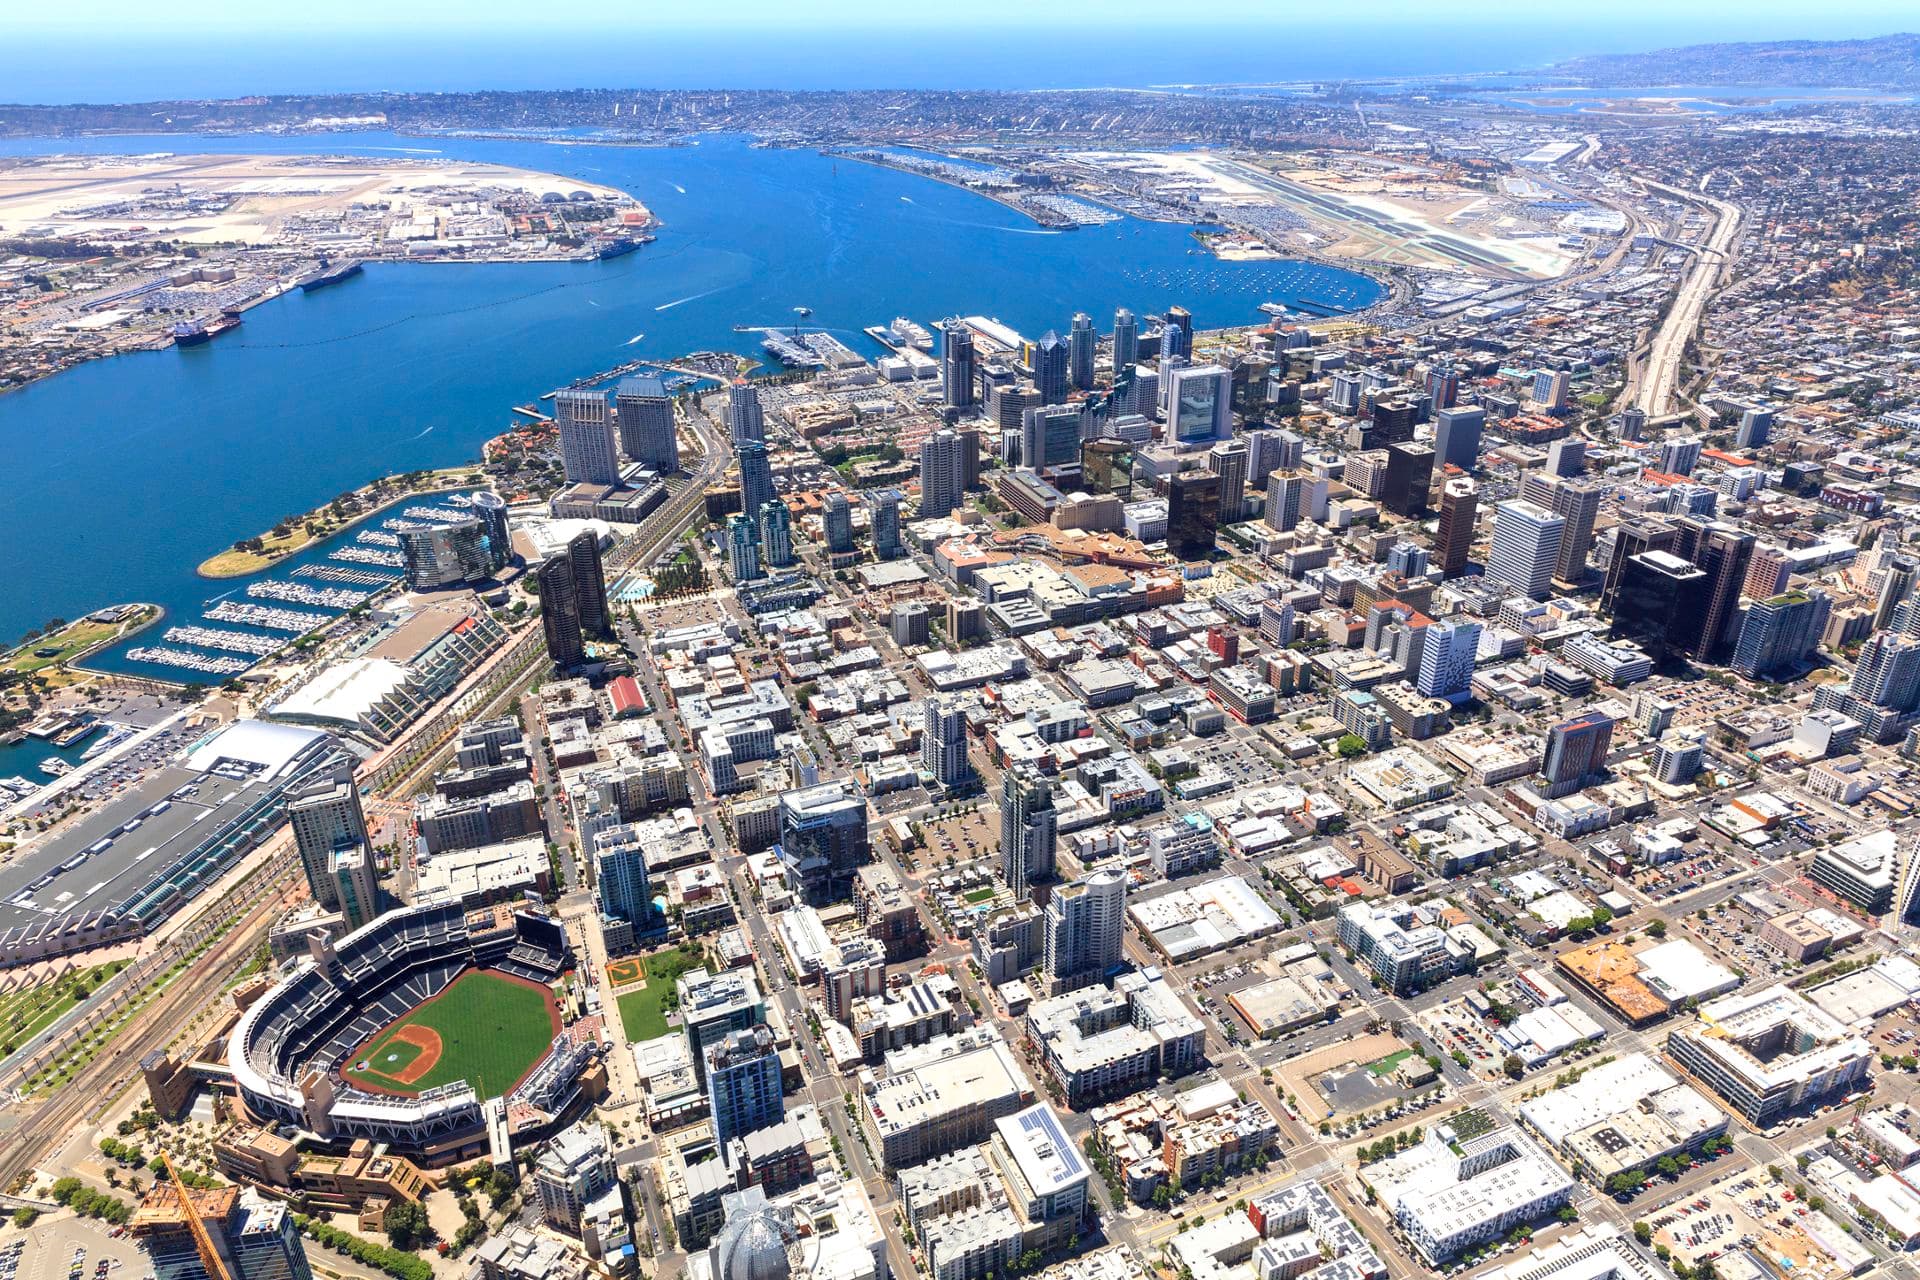 Aerial view of Downtown San Diego for the Main Page 2017 Carousel.